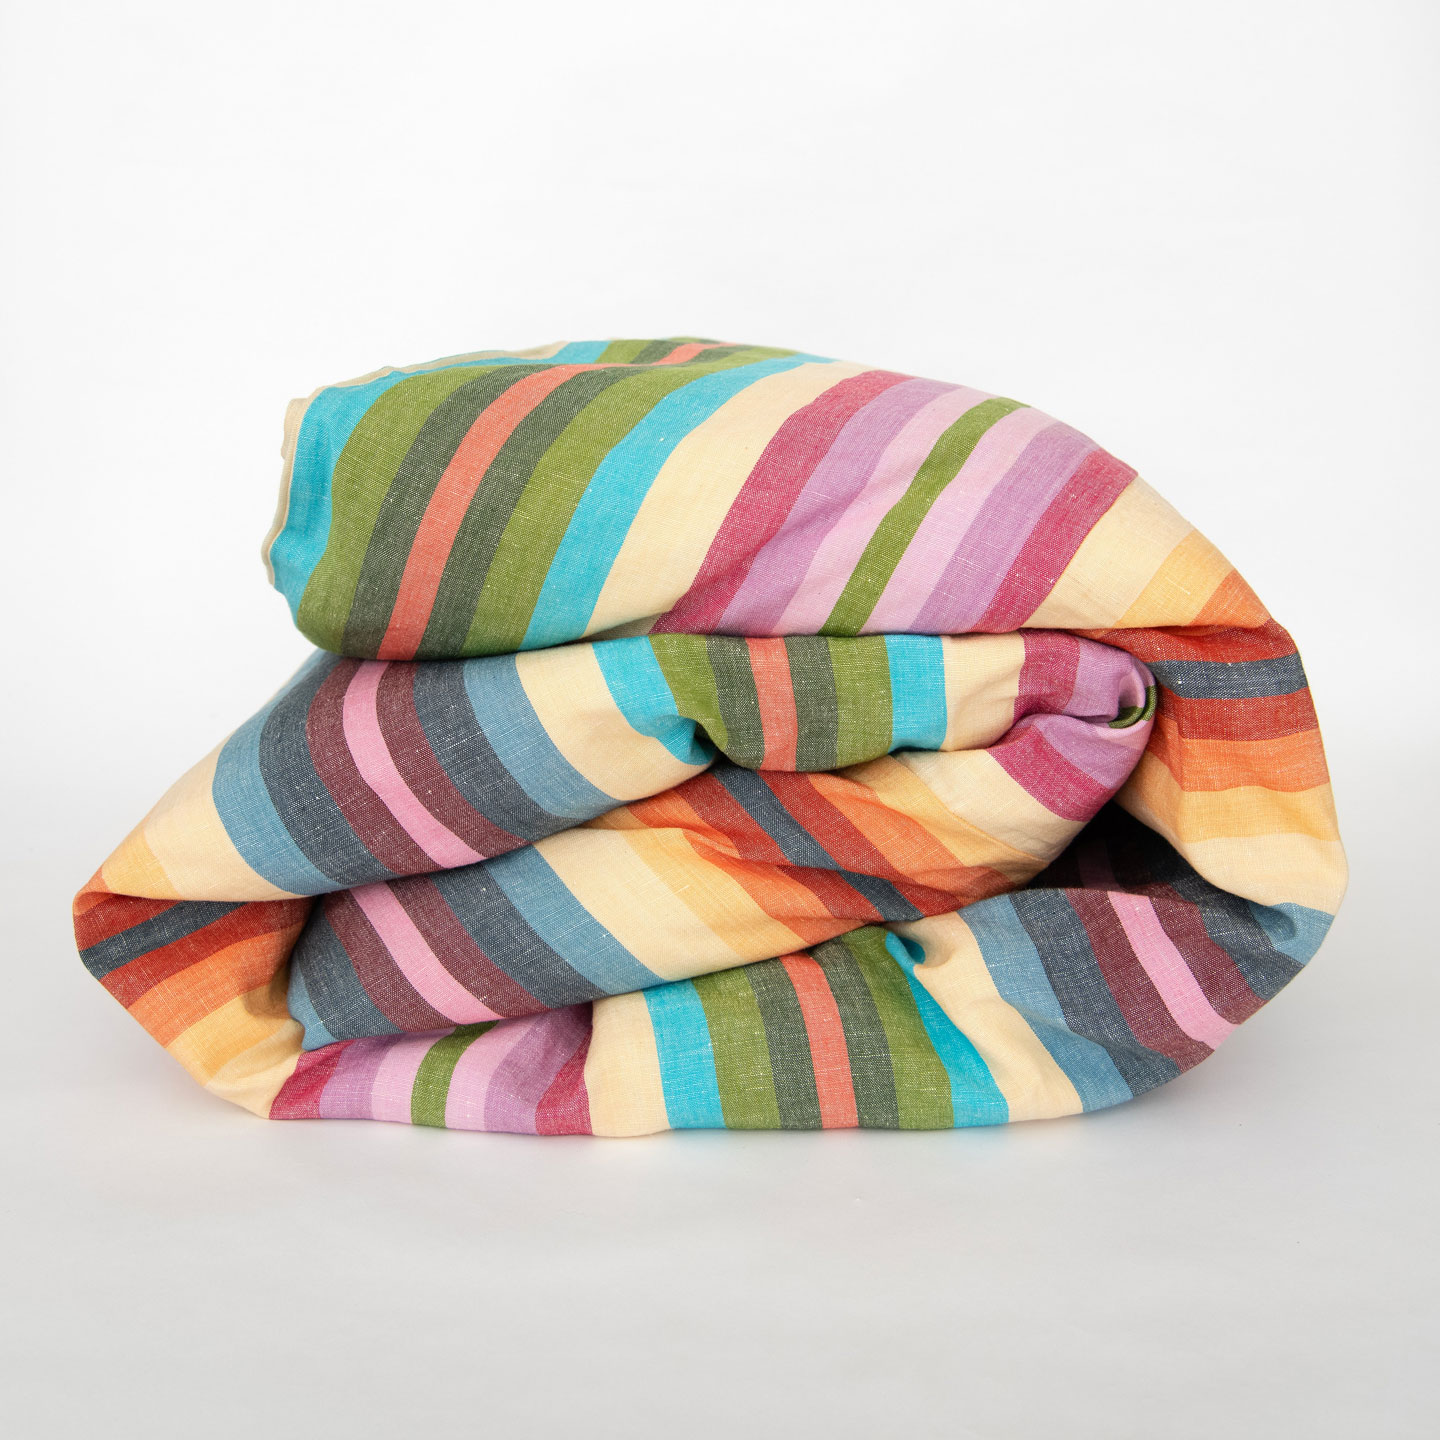 colorful striped linen blanket from Garza Marfa